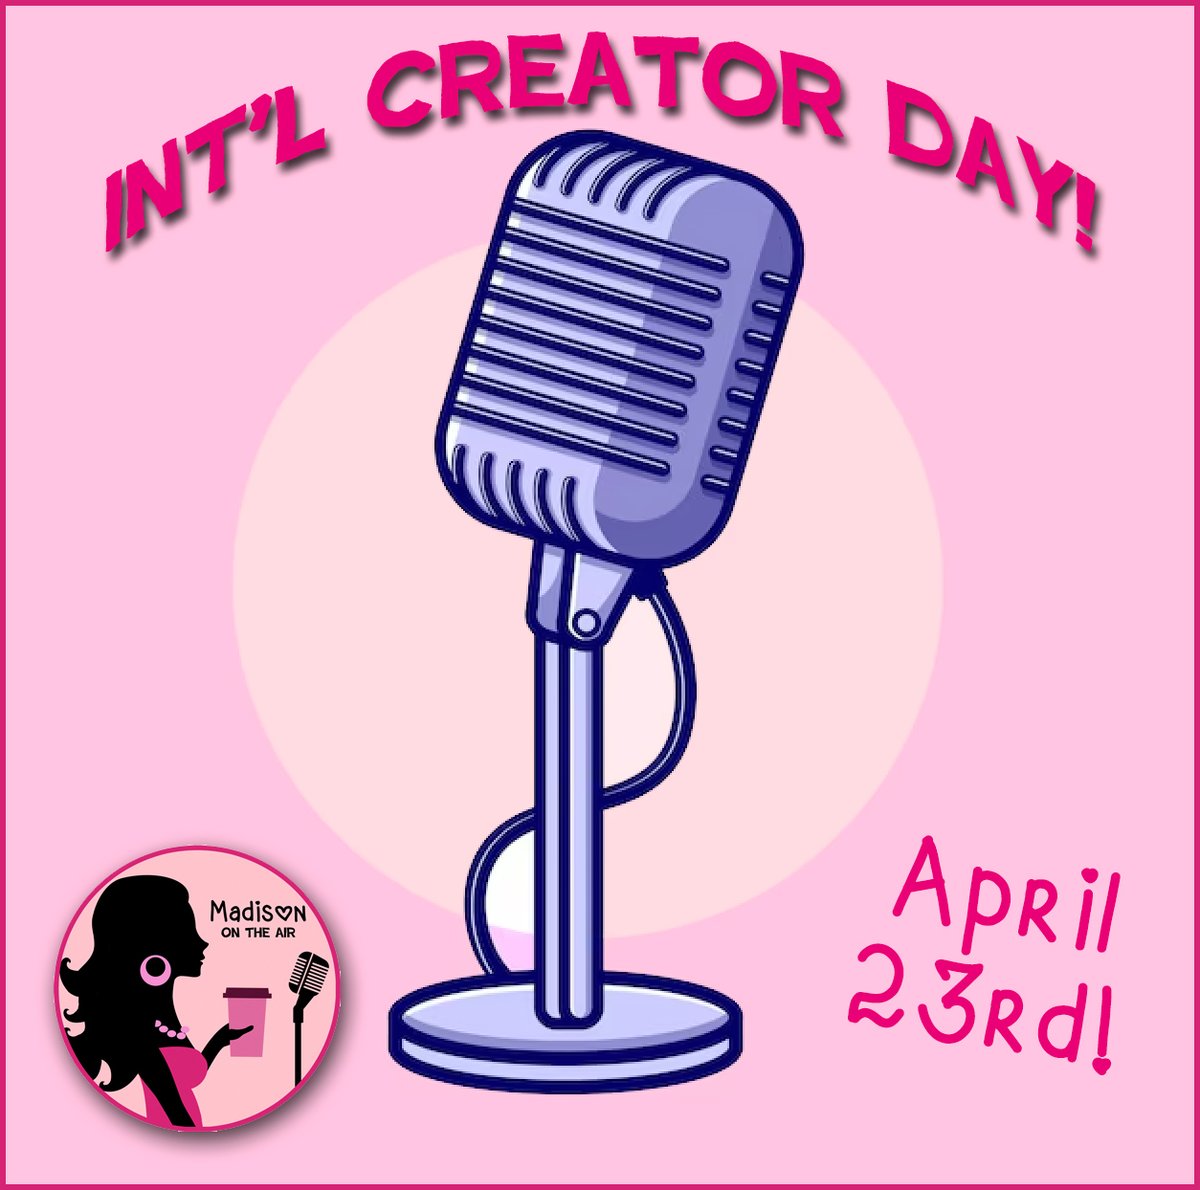 APRIL 23rd is INT'L CREATOR DAY! The #audiodrama community is amazing. Celebrate those who entertain your ears! I've tagged just a few (sorry if I missed you!) Share and tag your faves! 

#OldTimeRadio #PodNation #audiofiction #fictionpodcast #contentcreator #madisonontheair